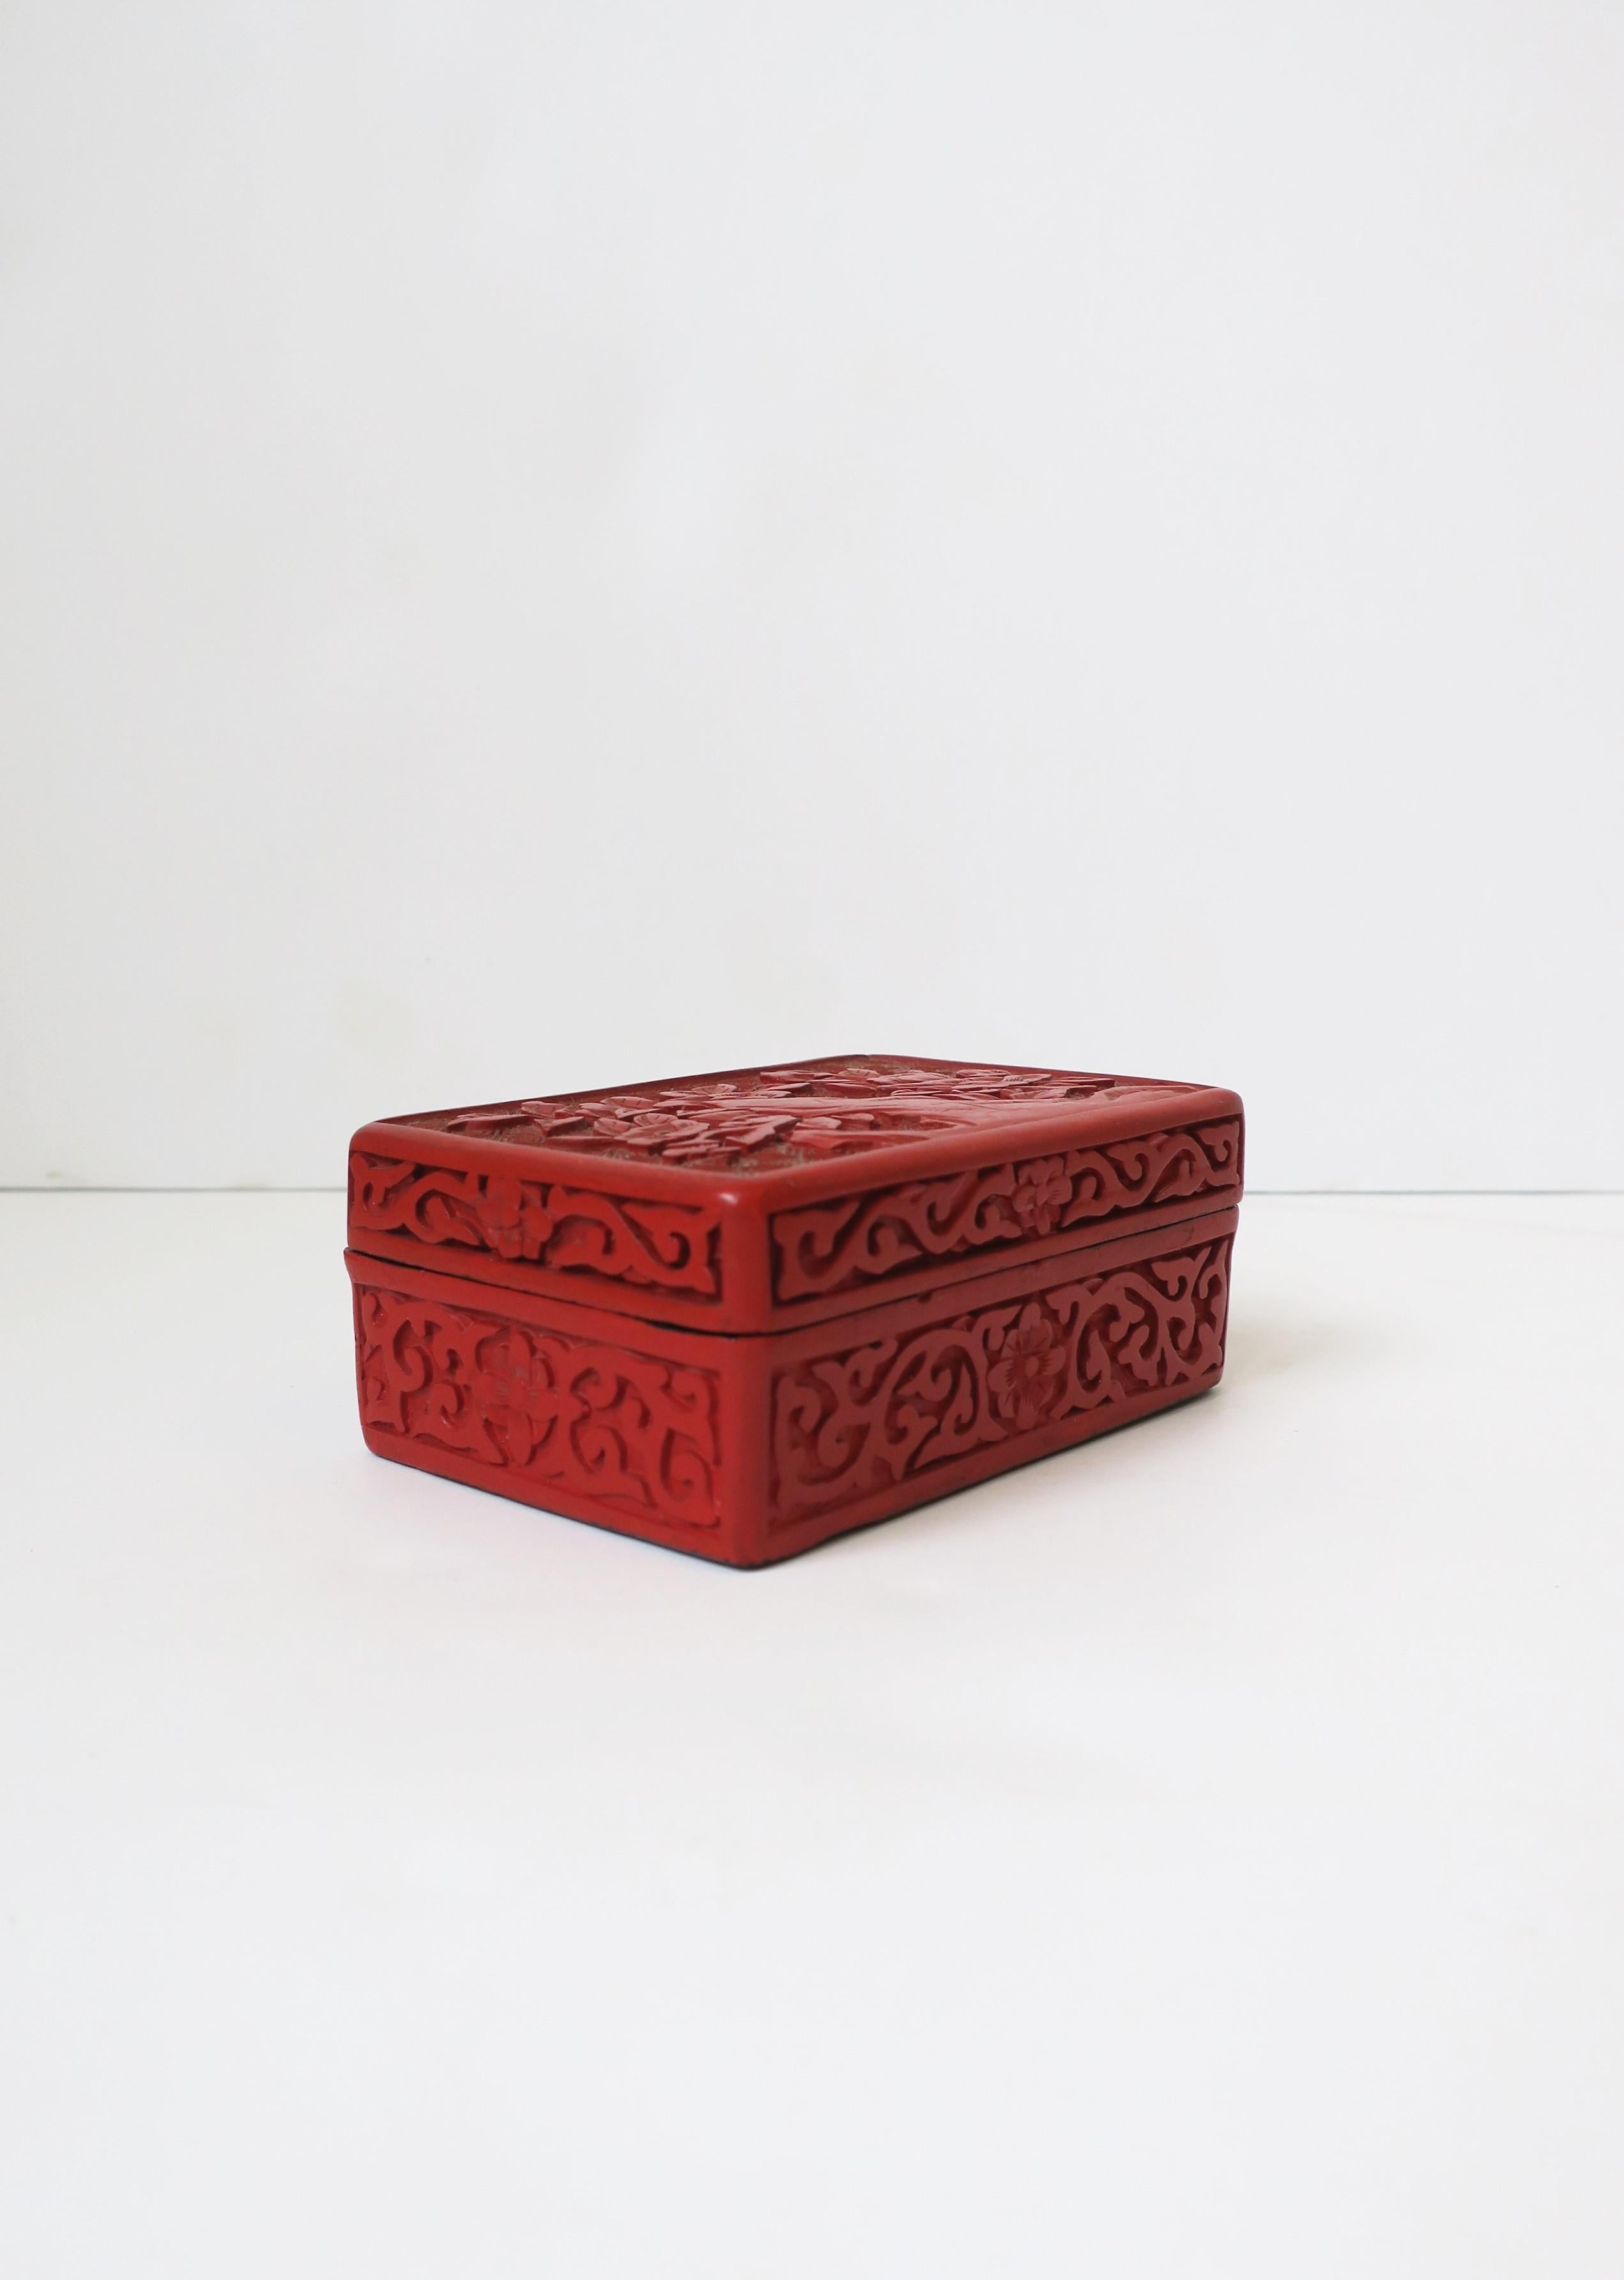 20th Century Chinese Red Cinnabar and Black Lacquer Box